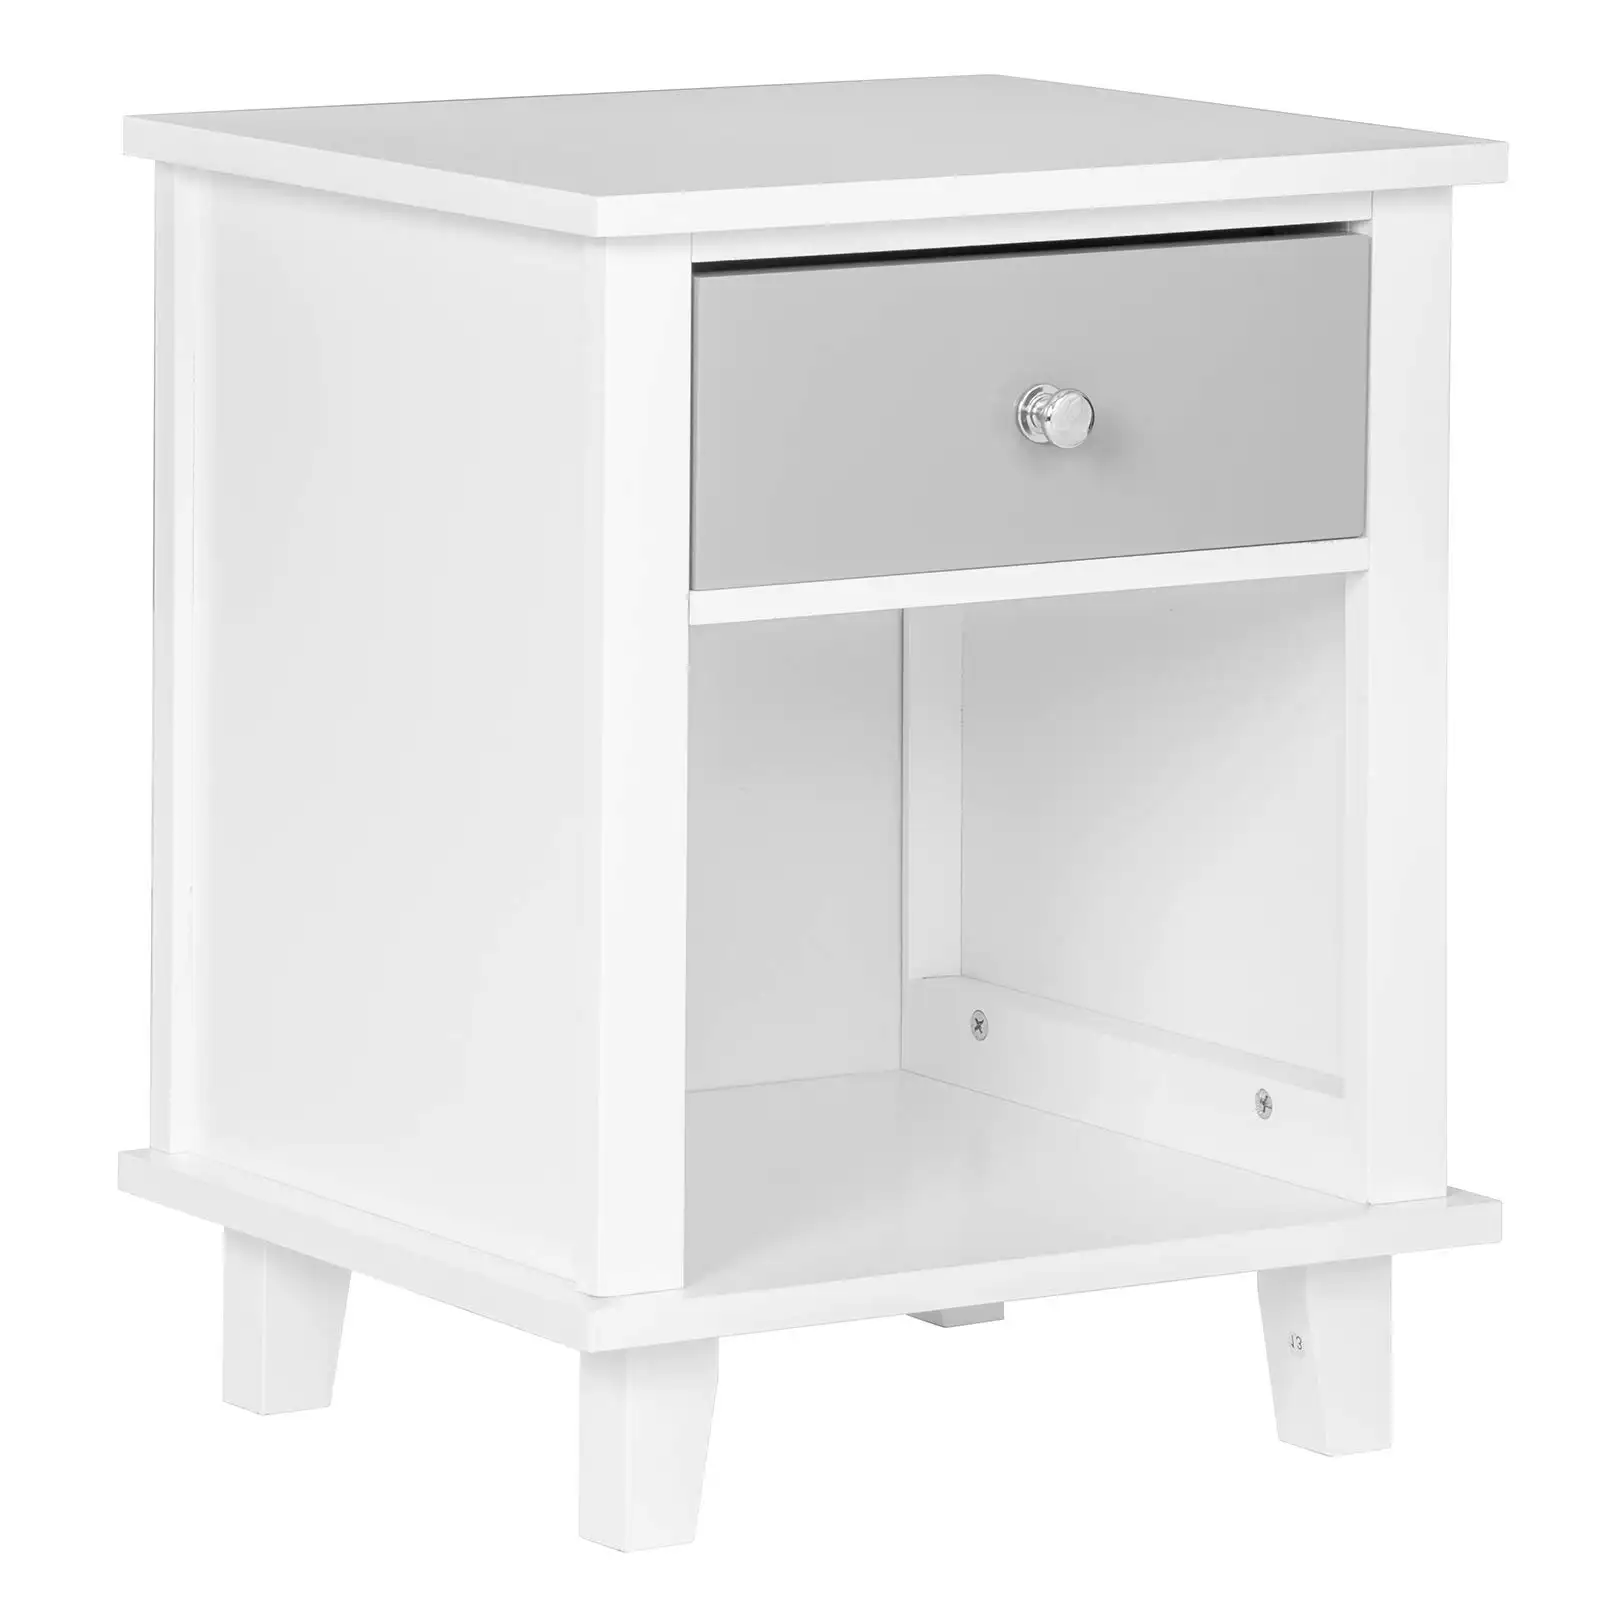 New Trend Kids Bedroom Furniture Bed Side Table Chipboard Bedside Table Coffee Table with Drawer and Open Compartment, White